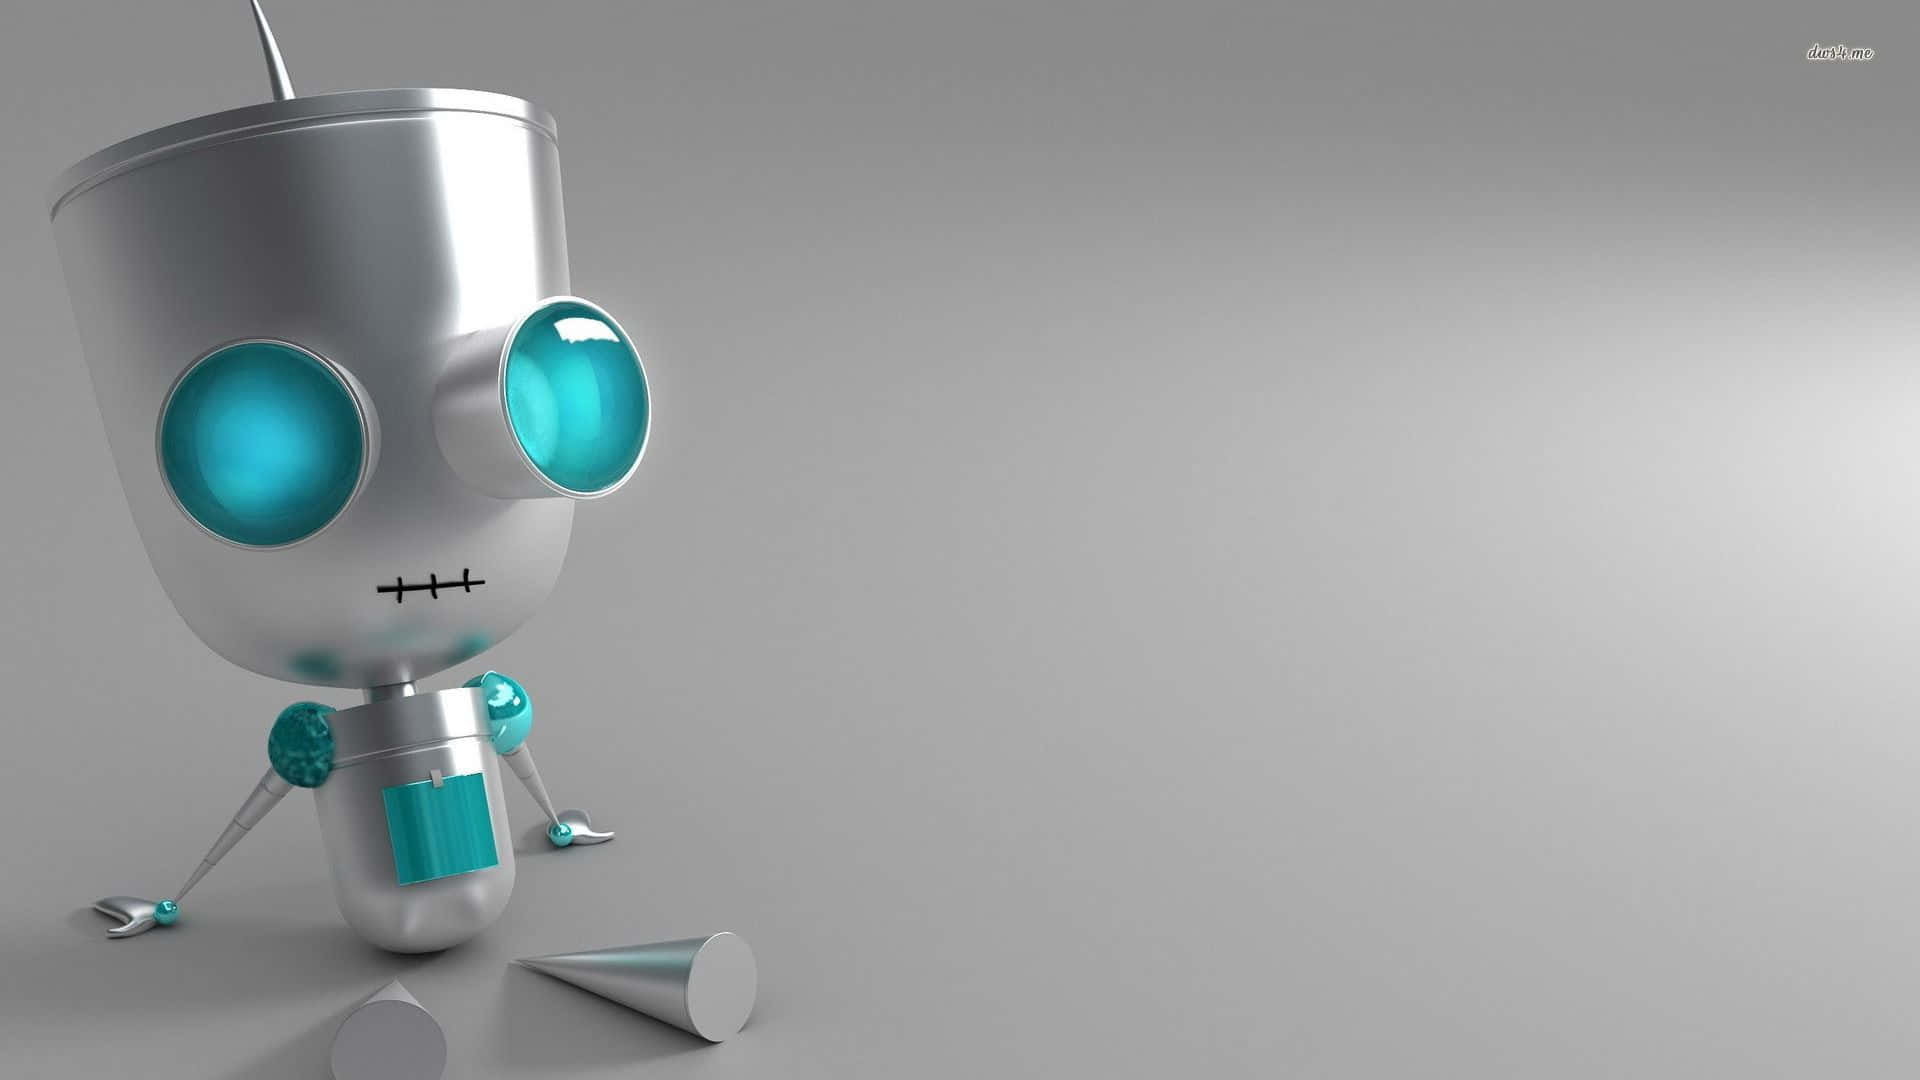 Futuristic Cartoon Robot on a Colorful Background Wallpaper